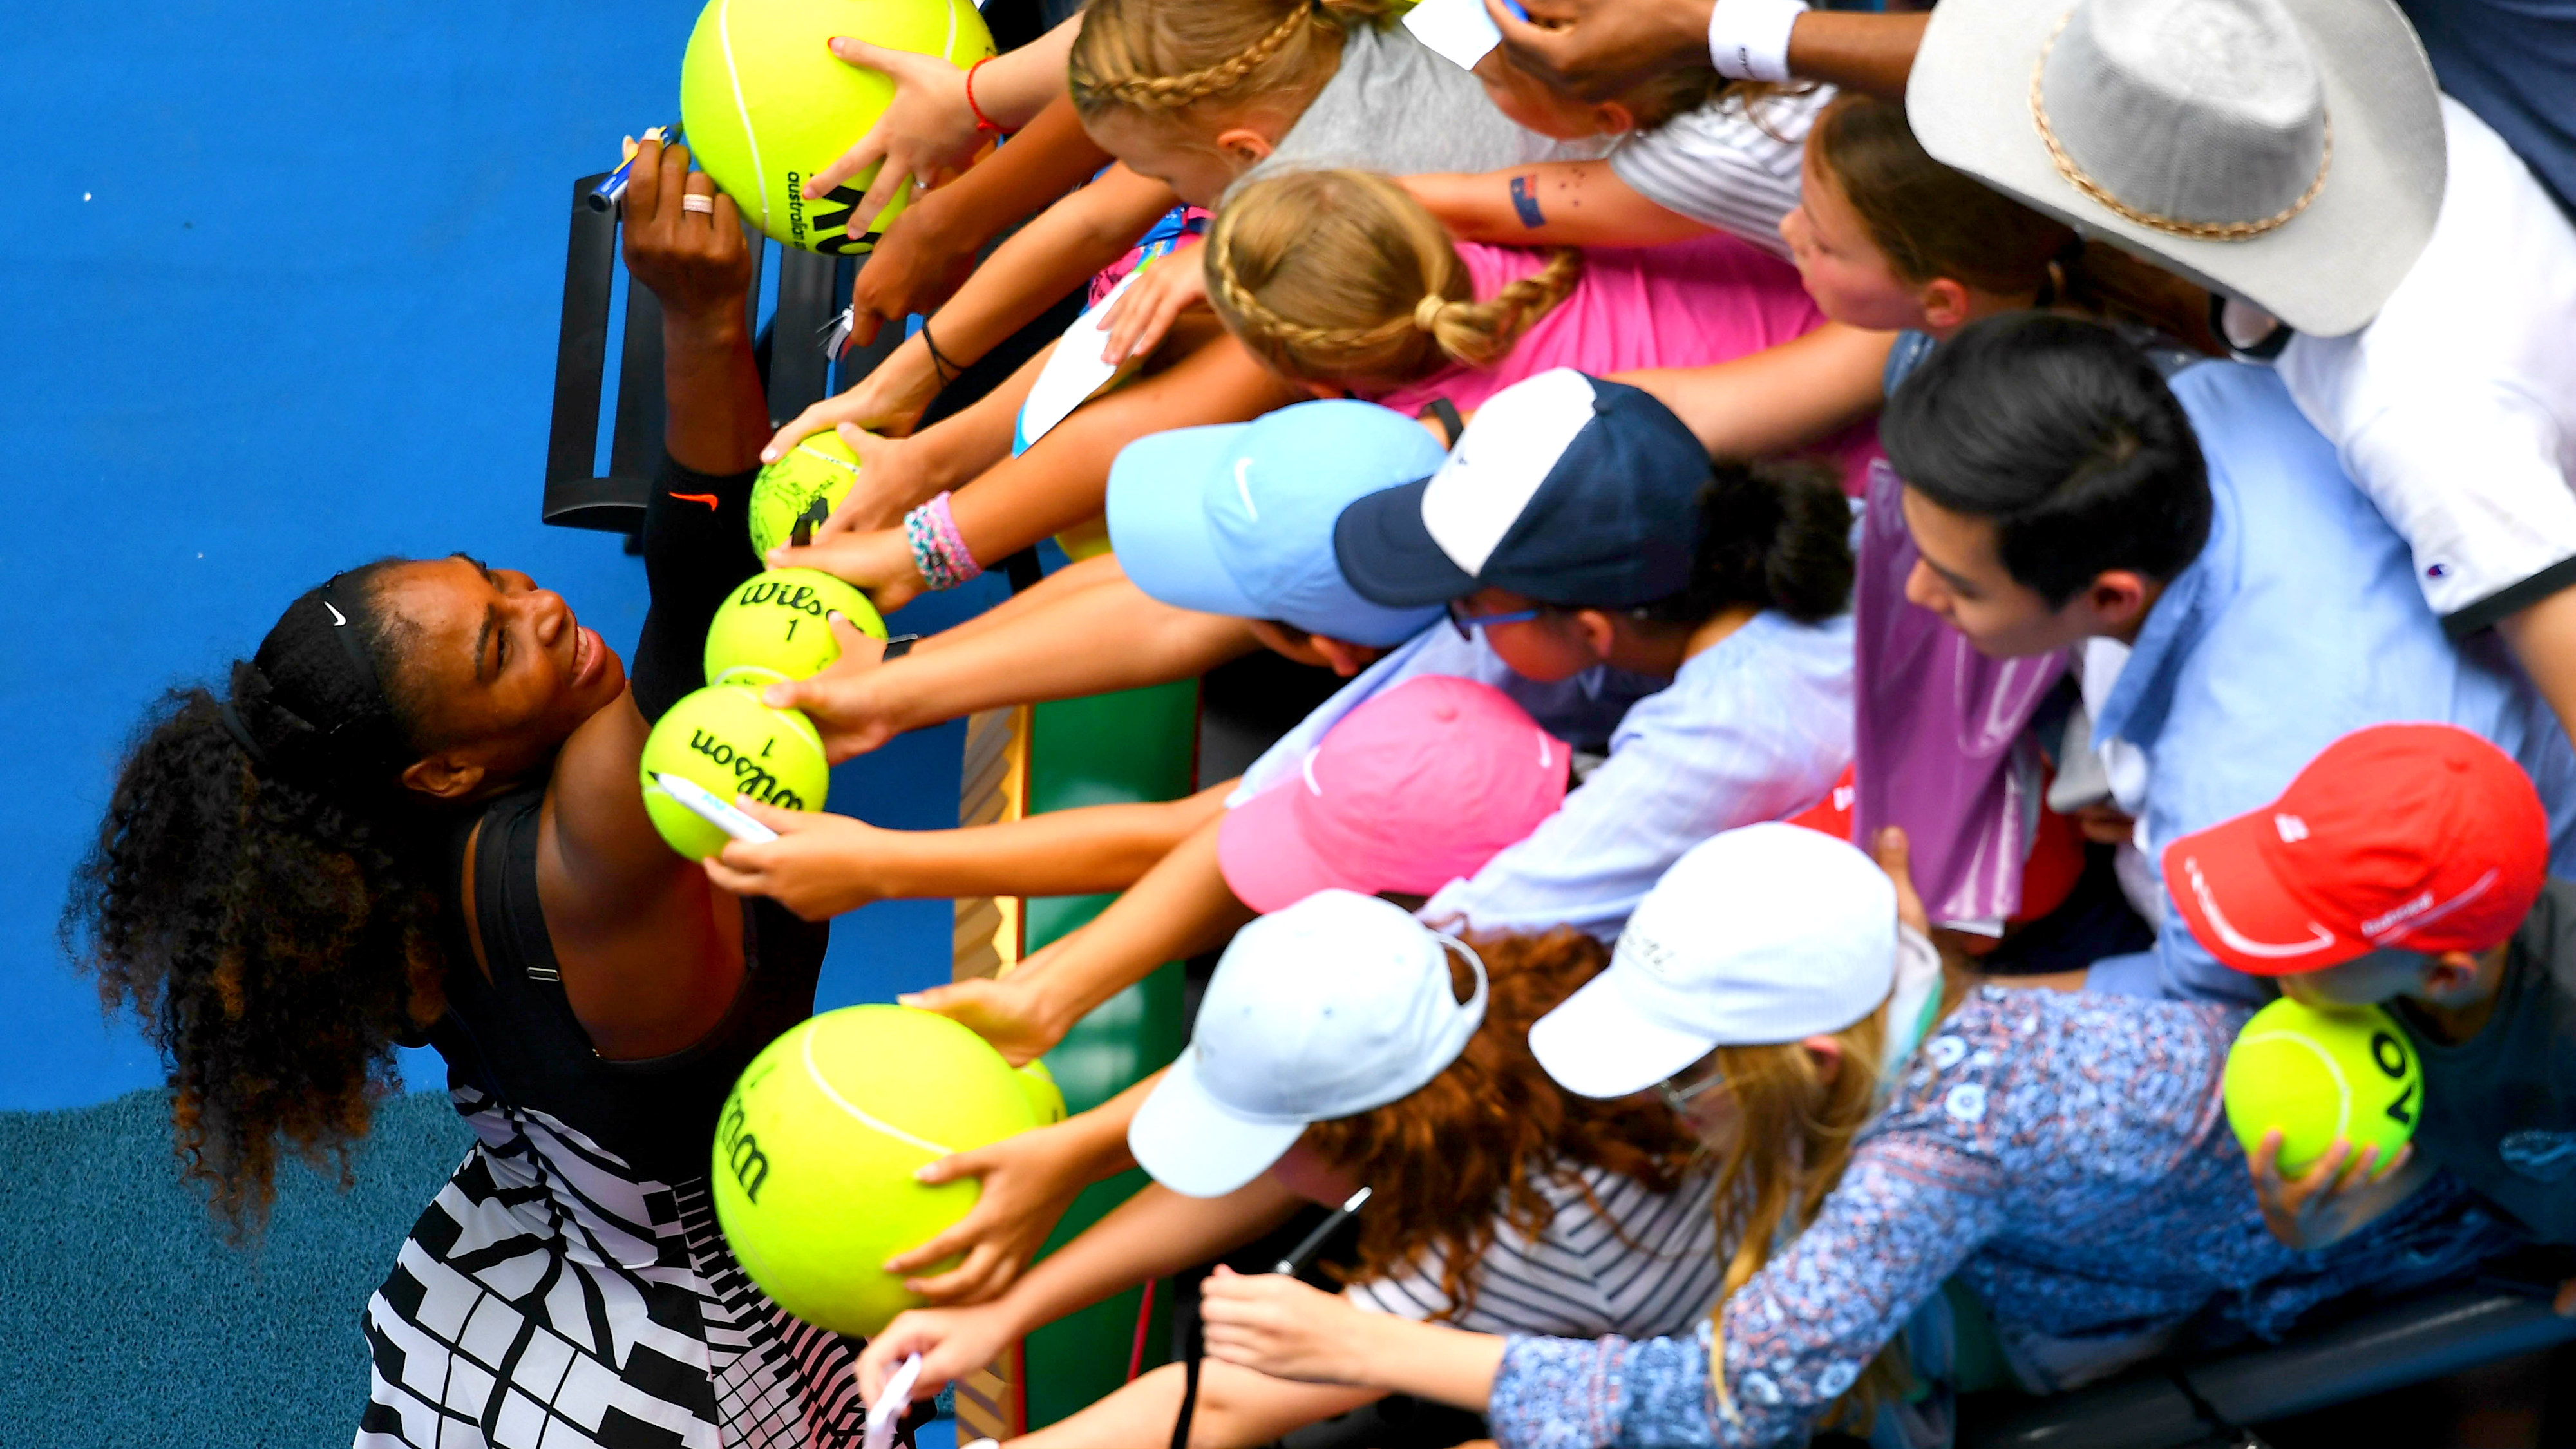 Serena Williams signs autographs for fans after winning her first-round match at the Australian Open in Melbourne